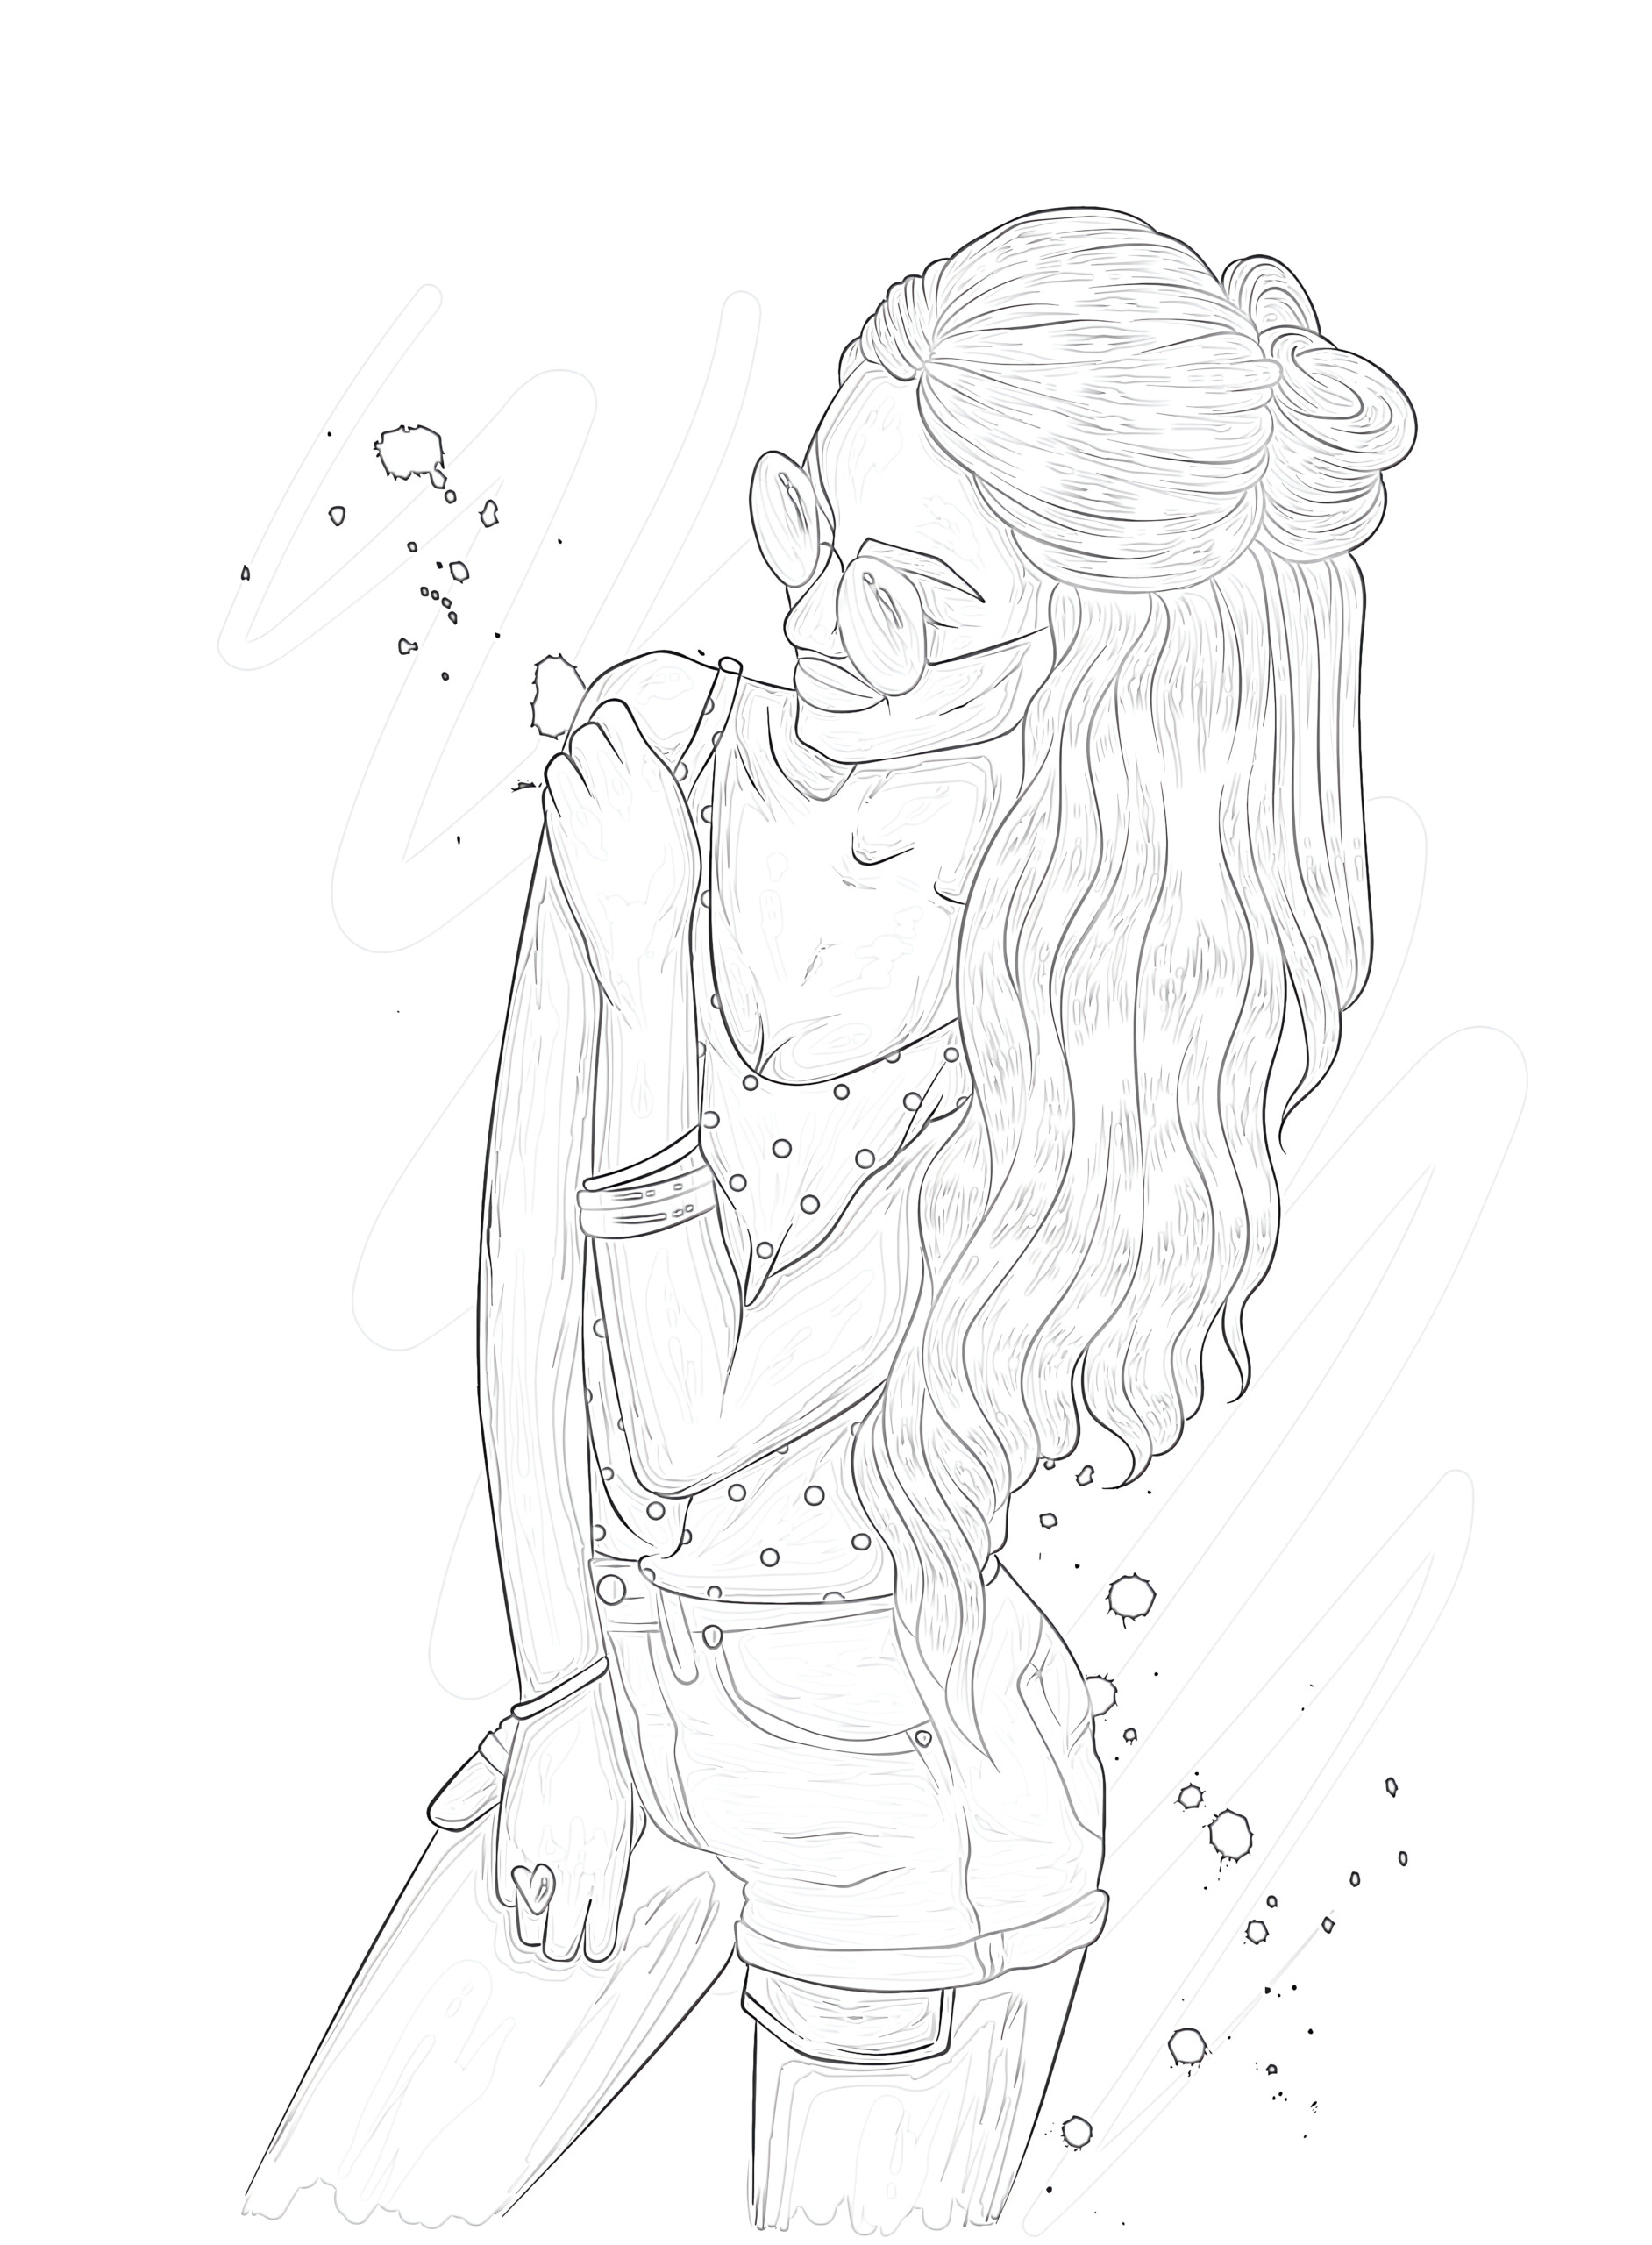 Girl with Glasses - Coloring page